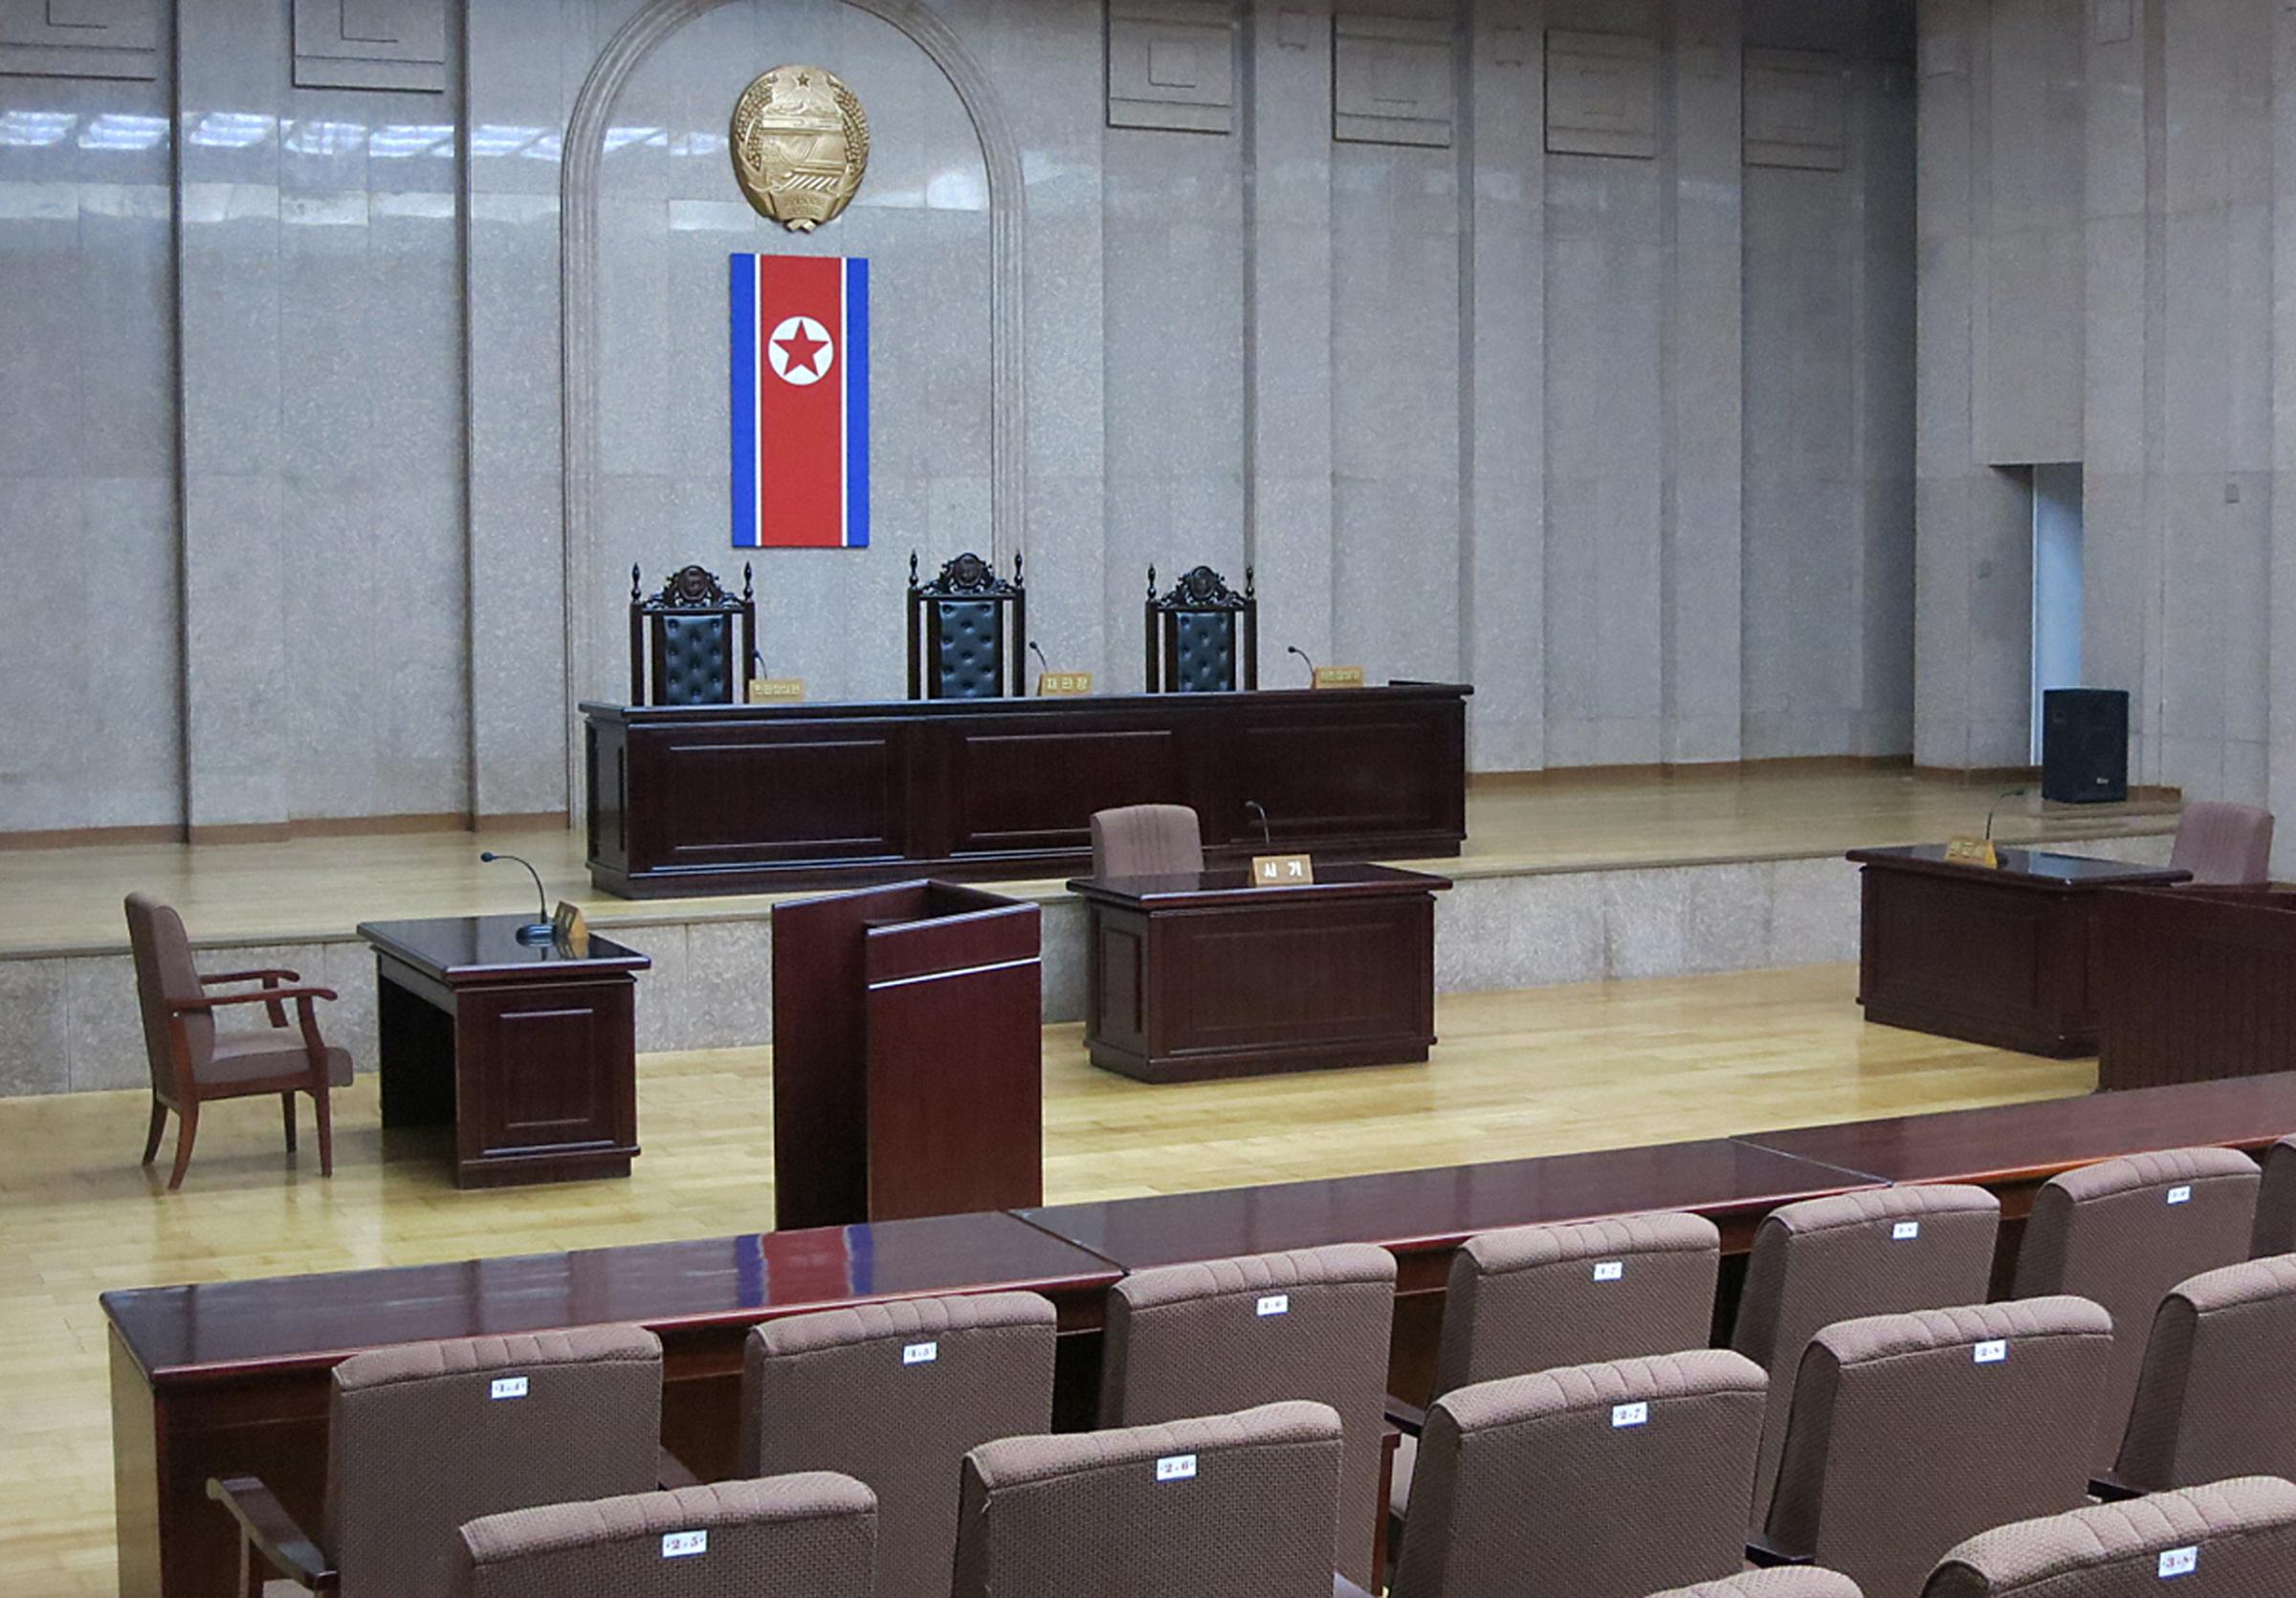 A North Korean flag hangs inside the interior of Pyongyang’s Supreme Court in March 2013.